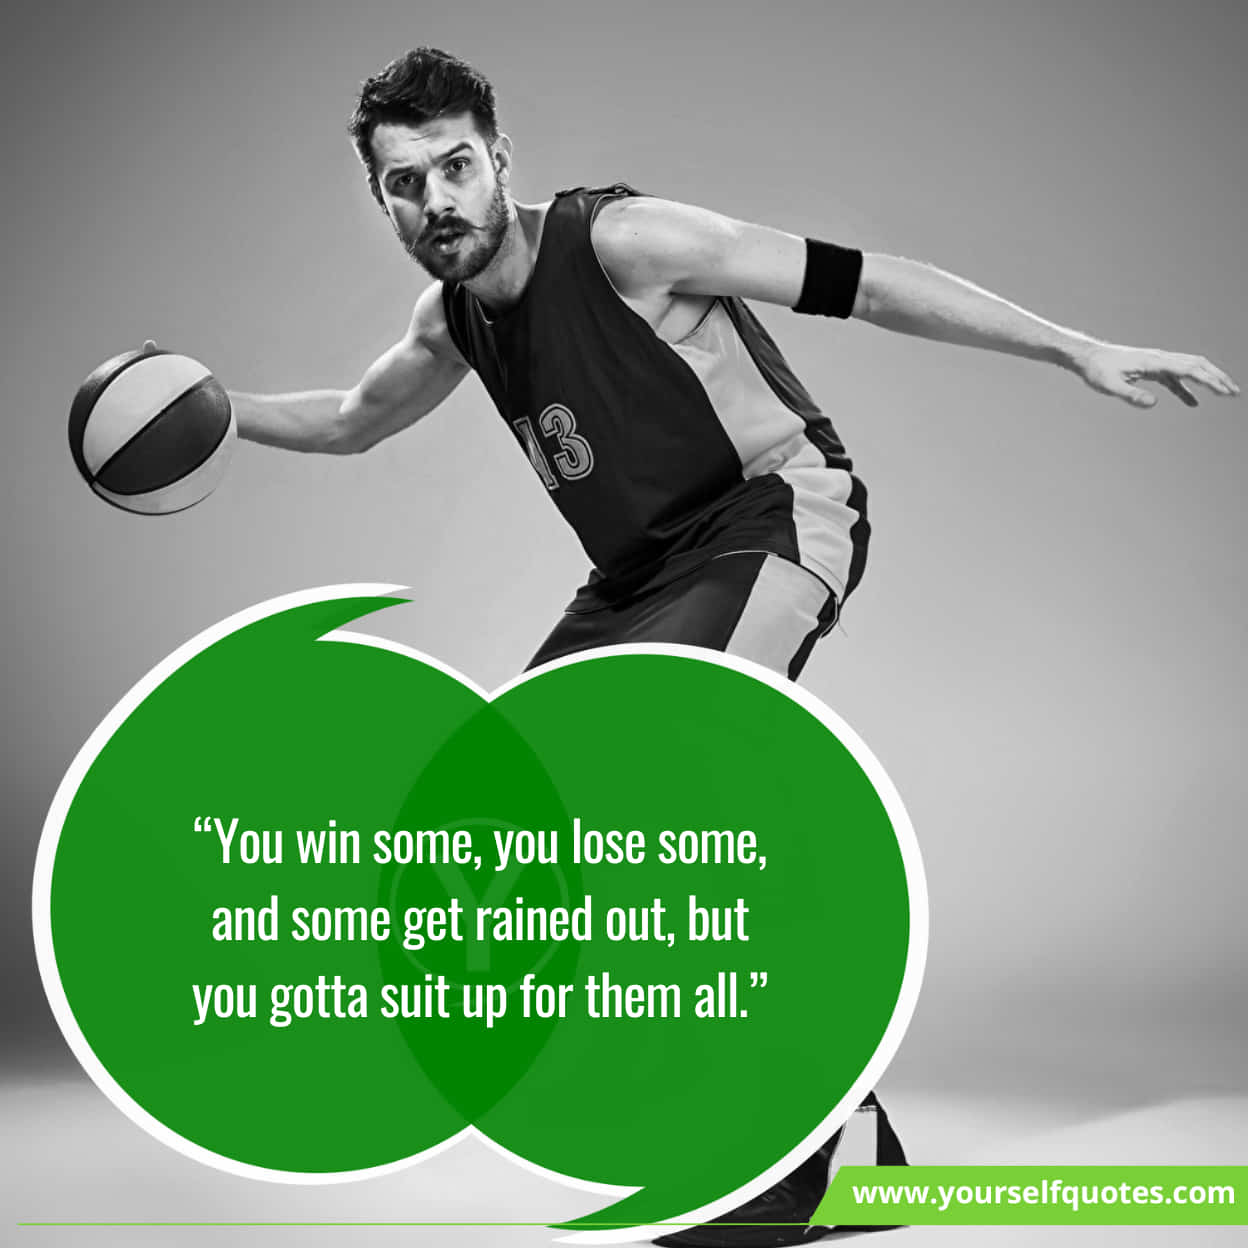 latest Best National Sports Day Quotes